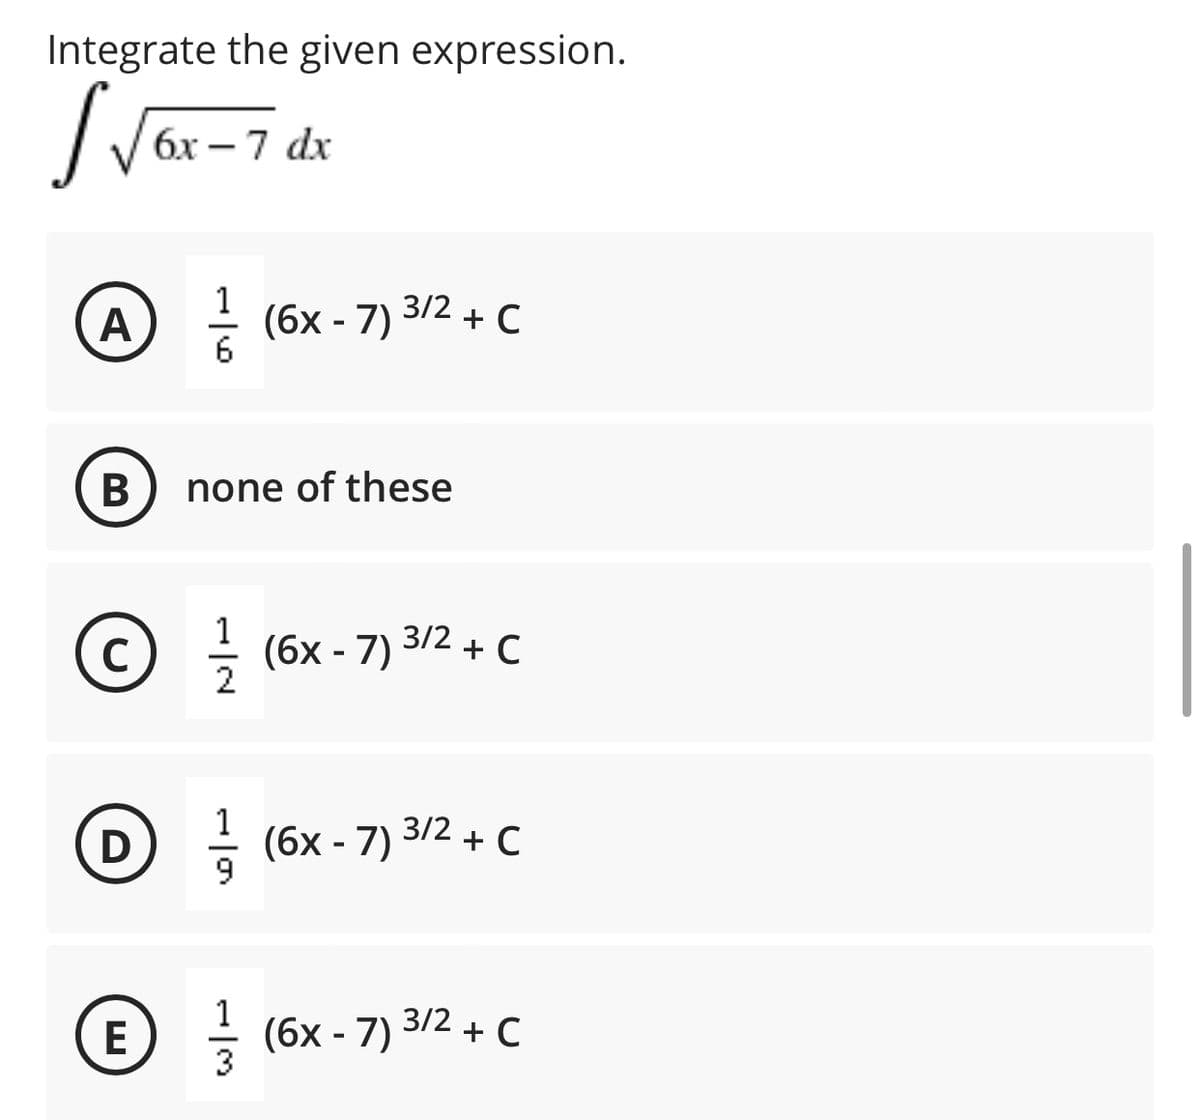 Integrate the given expression.
бх — 7 dx
A - (6x - 7) 3/2 + C
none of these
1
(c) - (6x - 7) 3/2 + C
D : (6x - 7) 3/2 + C
E - (6x - 7) 3/2 + C
B
